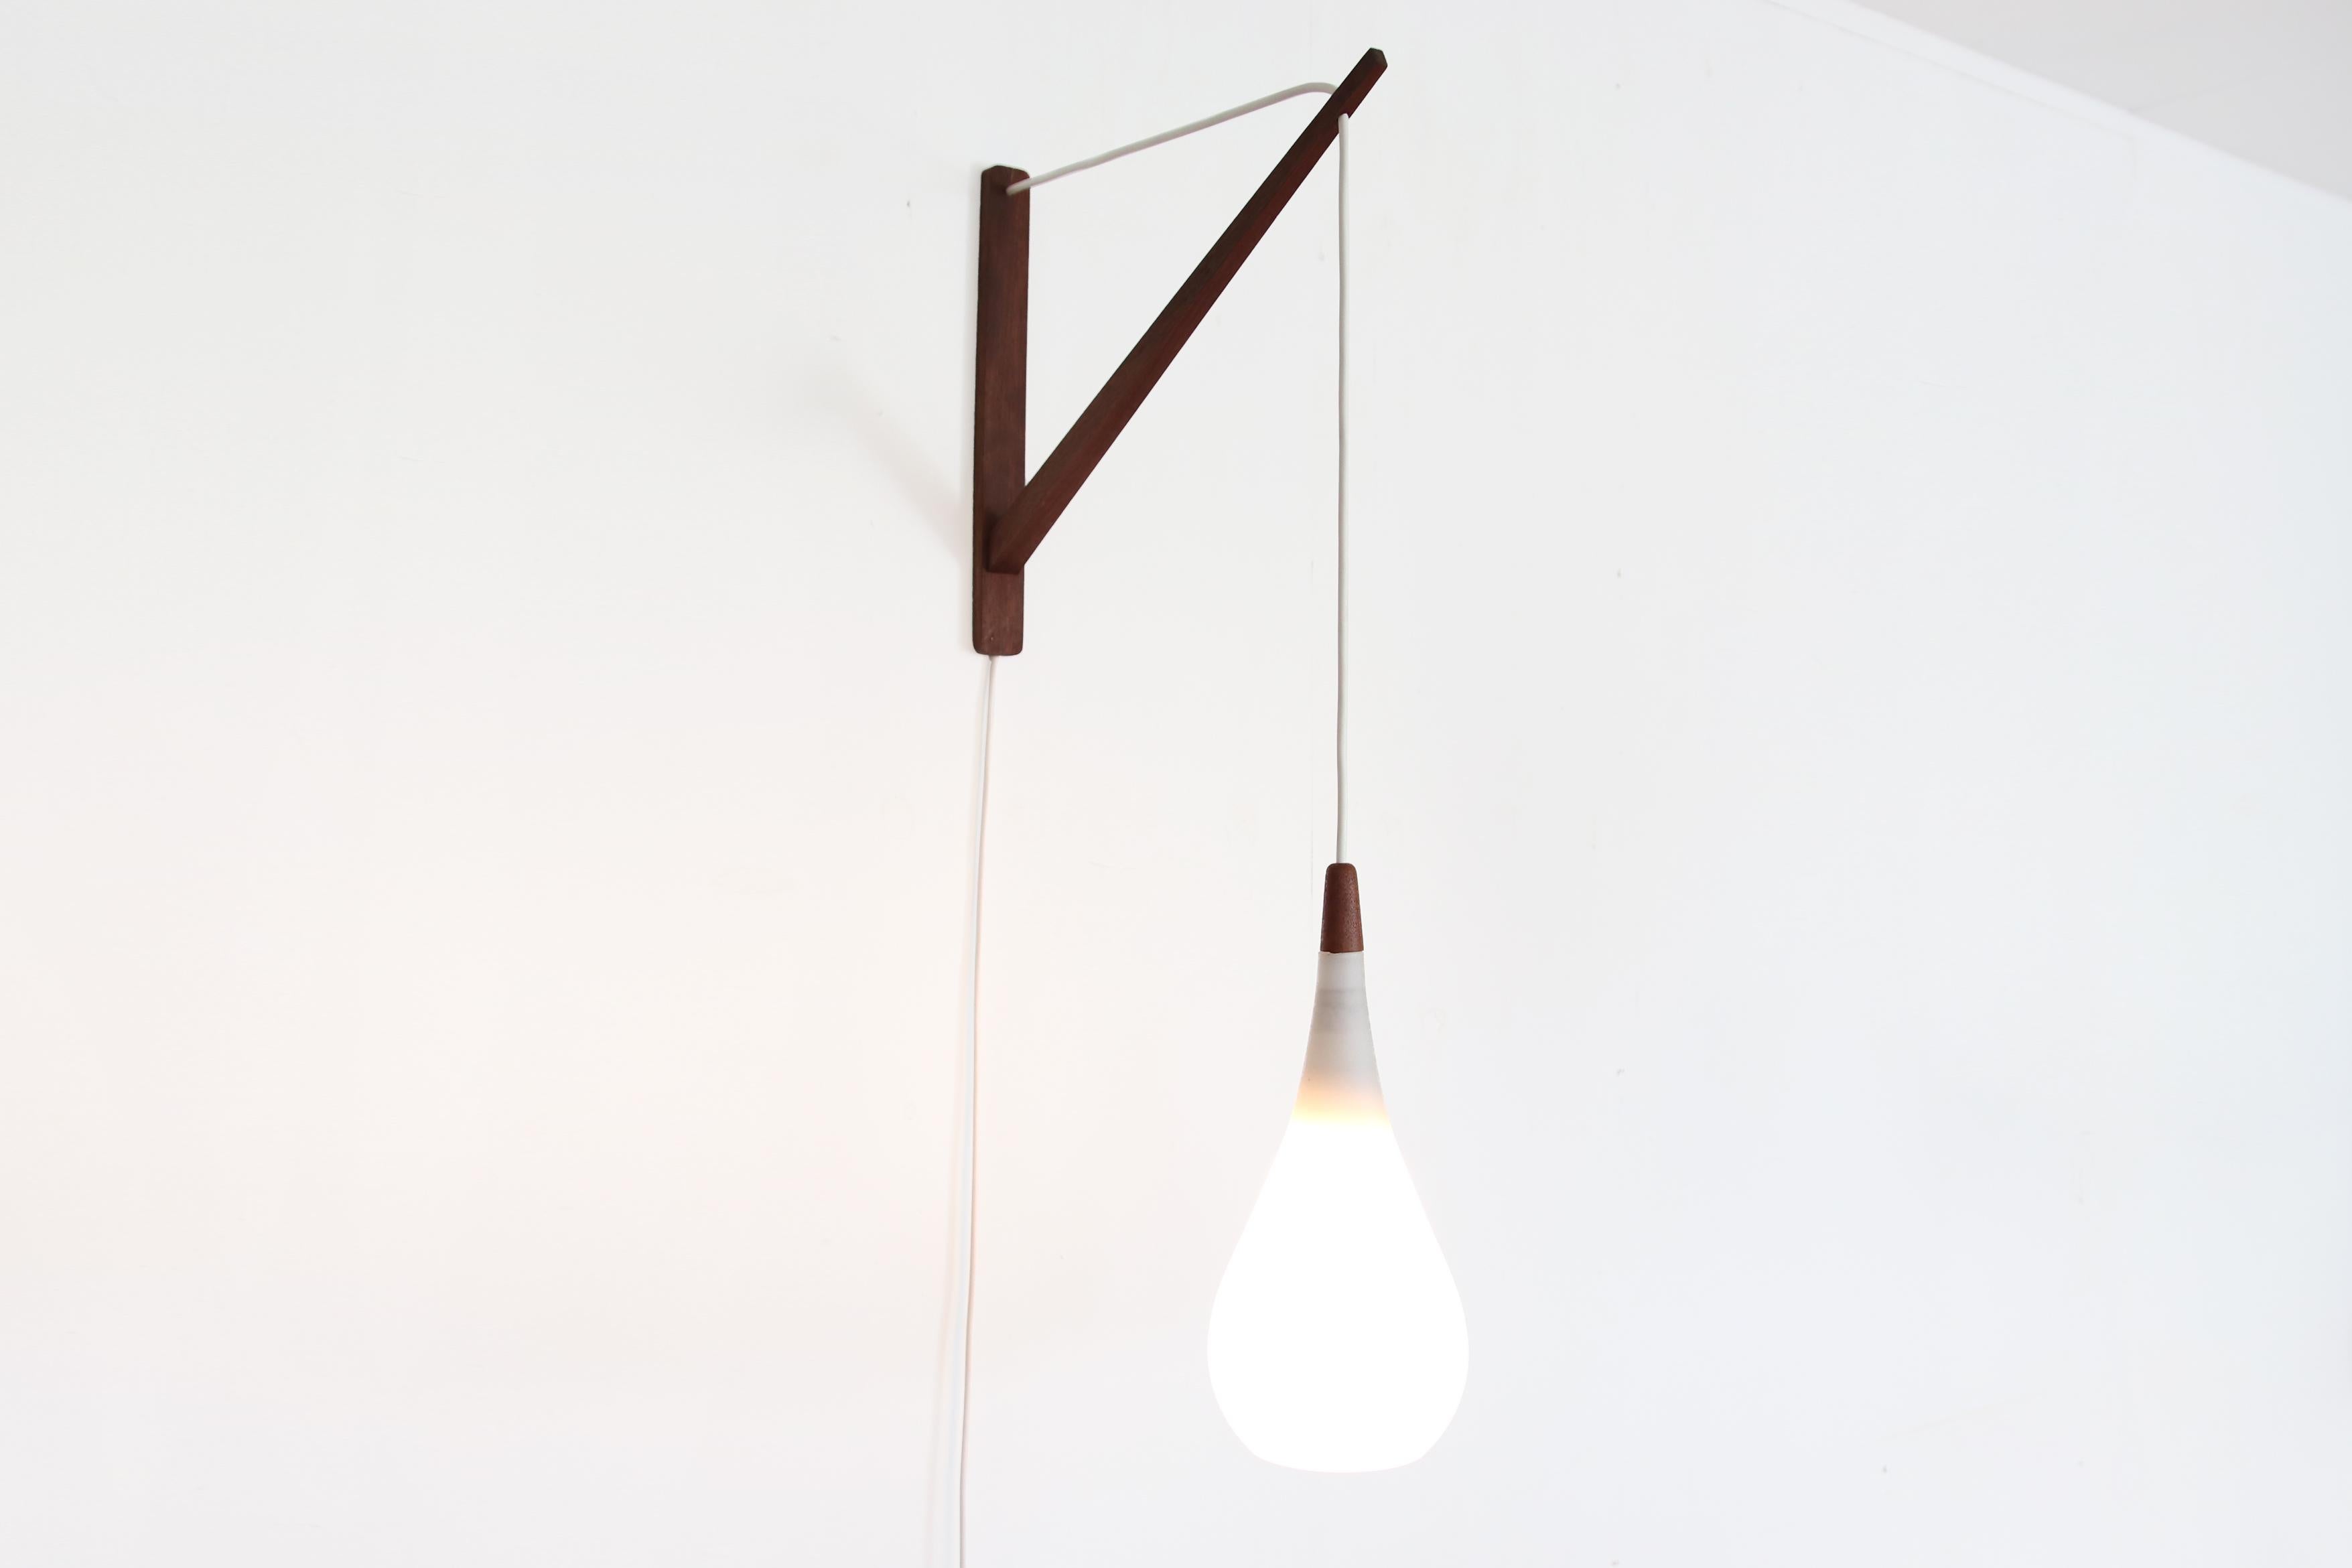 Very beautiful and sophisticated wall lamp from the Danish manufacturer Holmegaard. The opal white glass in teardrop shape with teak detail hangs from a minimalist teak wall fixture. The lamp is marked 